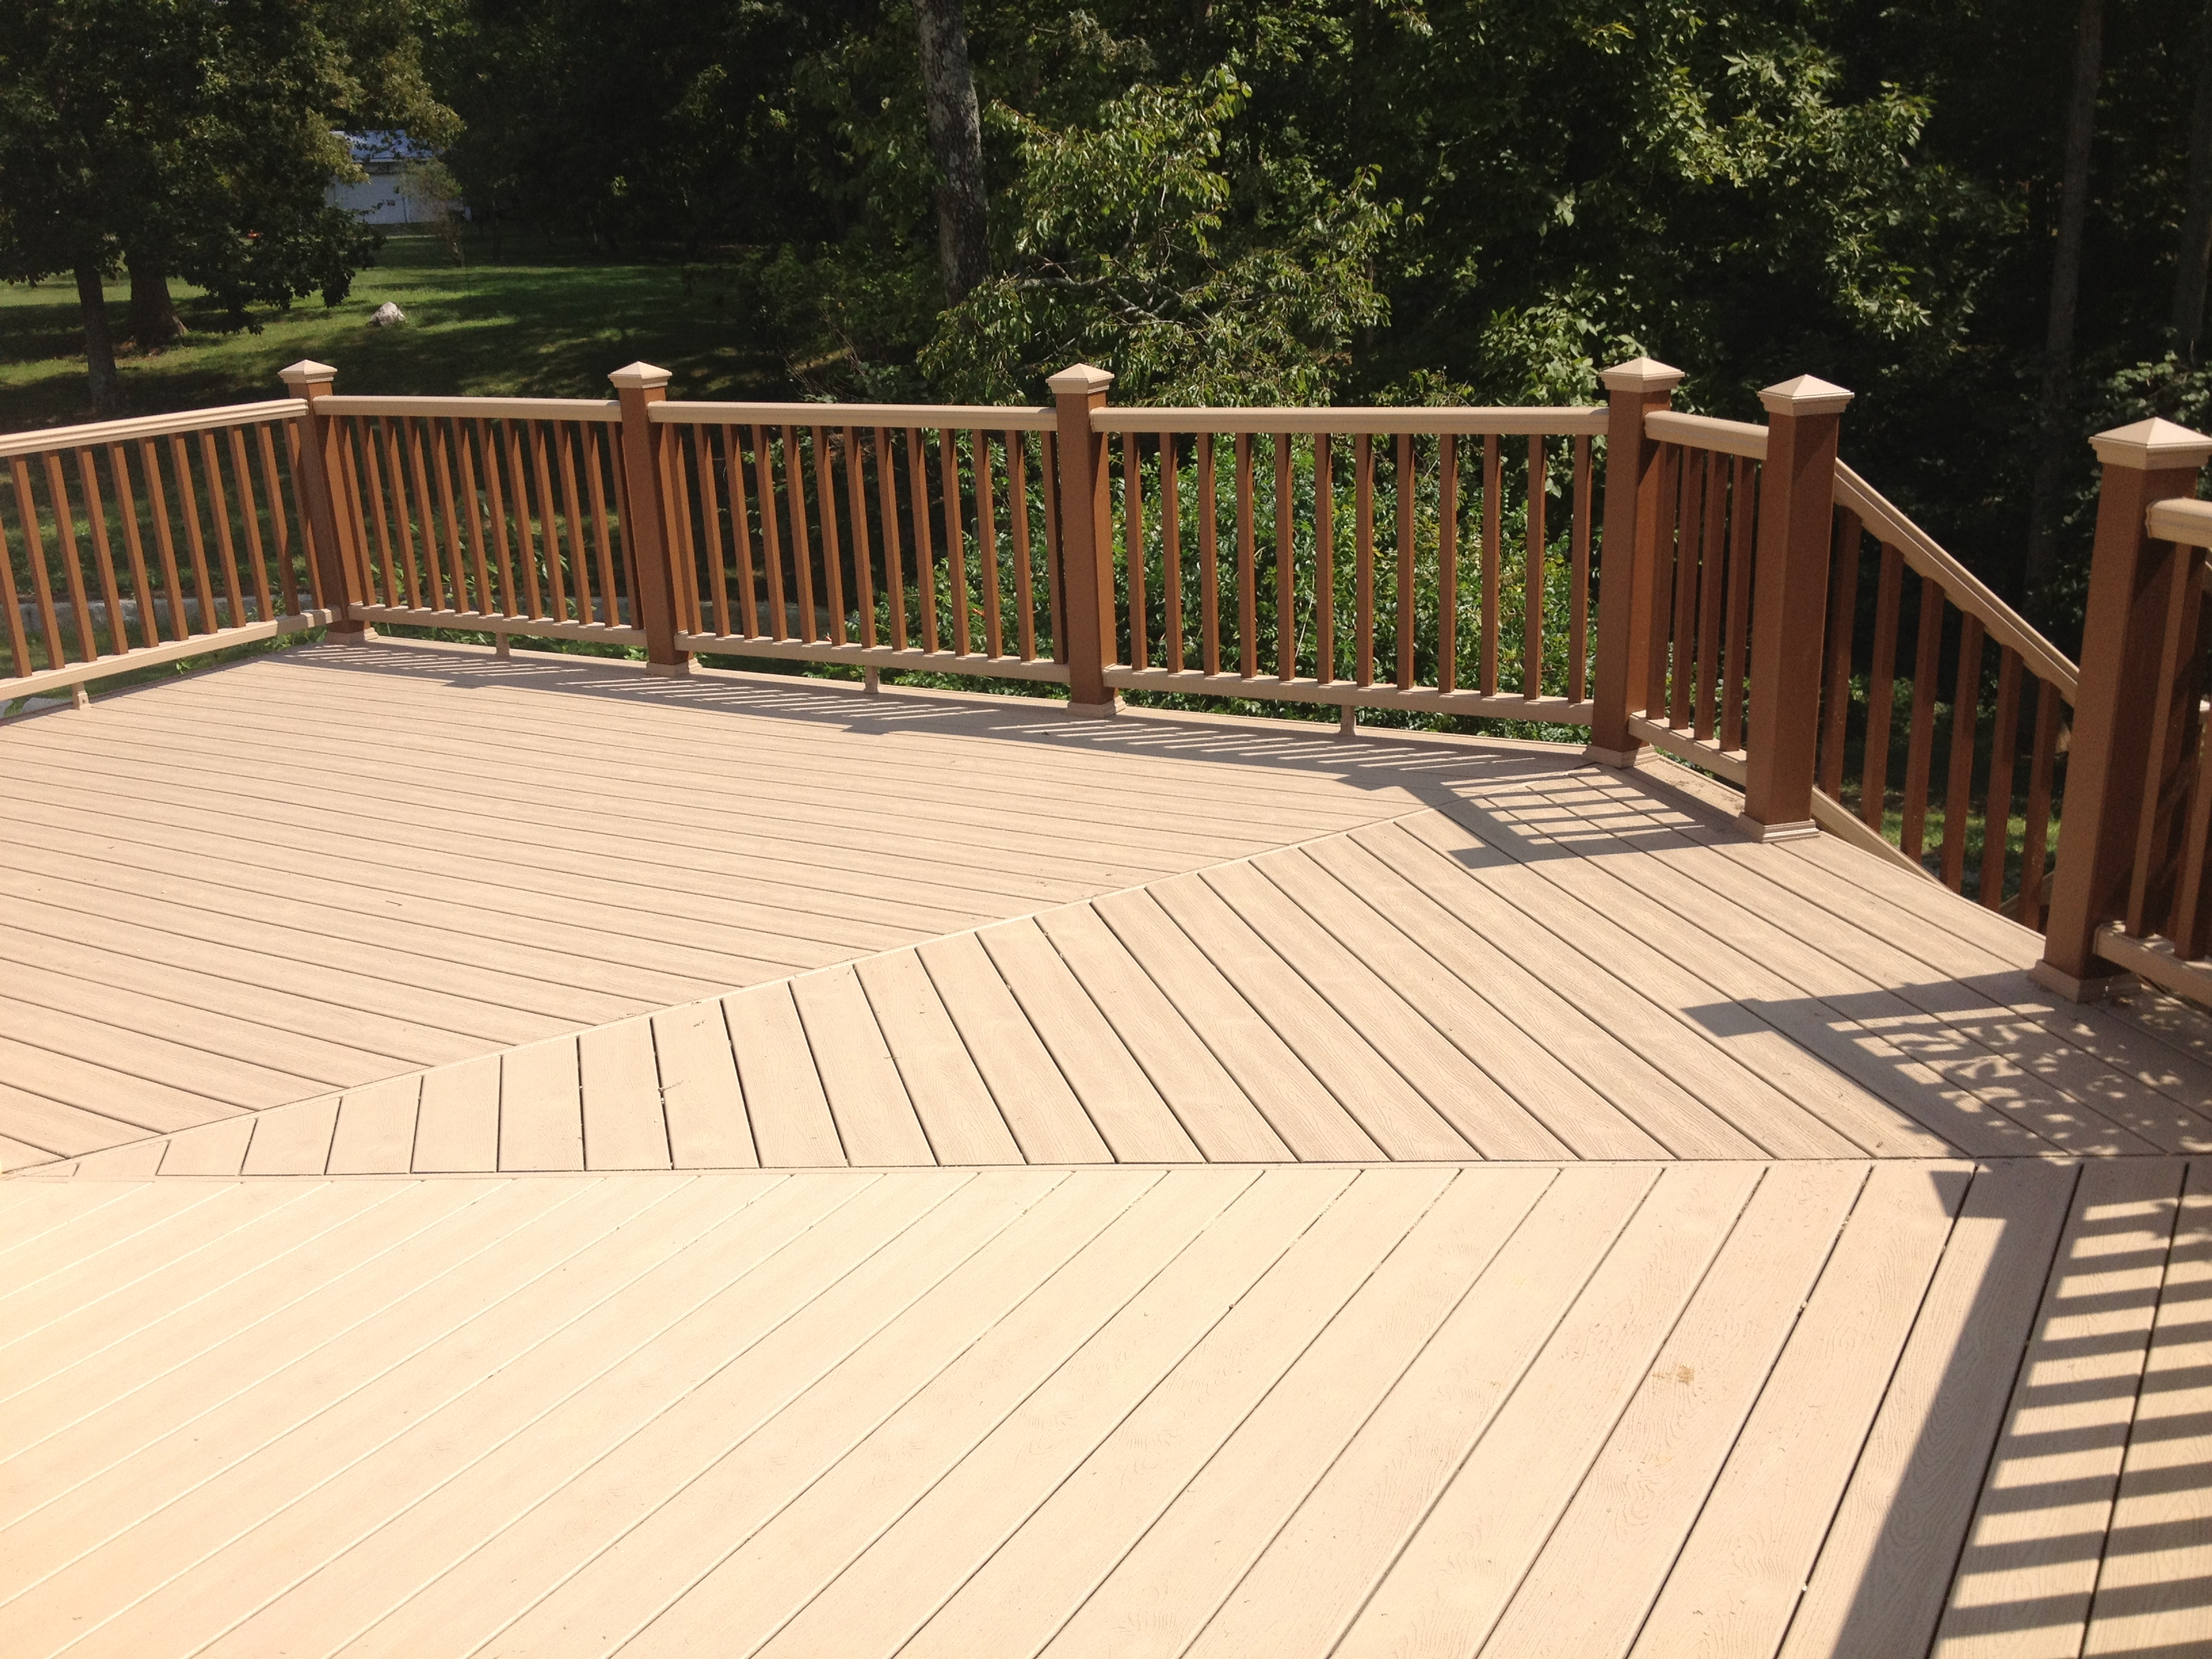 2x6 Composite Decking As Well Prices With Trex Plus Together Joist in measurements 3264 X 2448